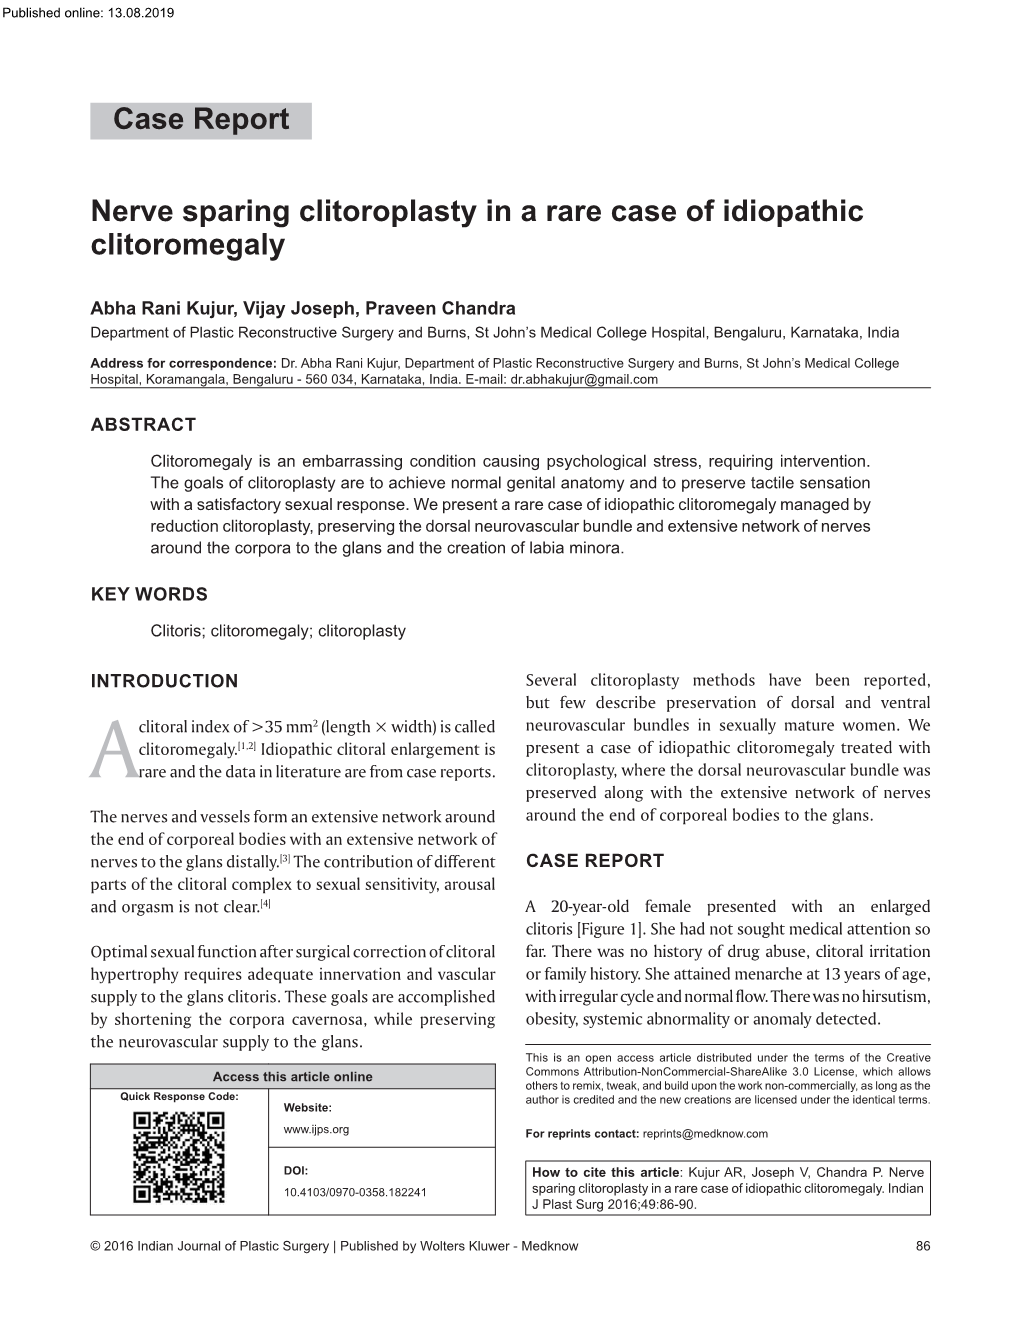 Nerve Sparing Clitoroplasty in a Rare Case of Idiopathic Clitoromegaly